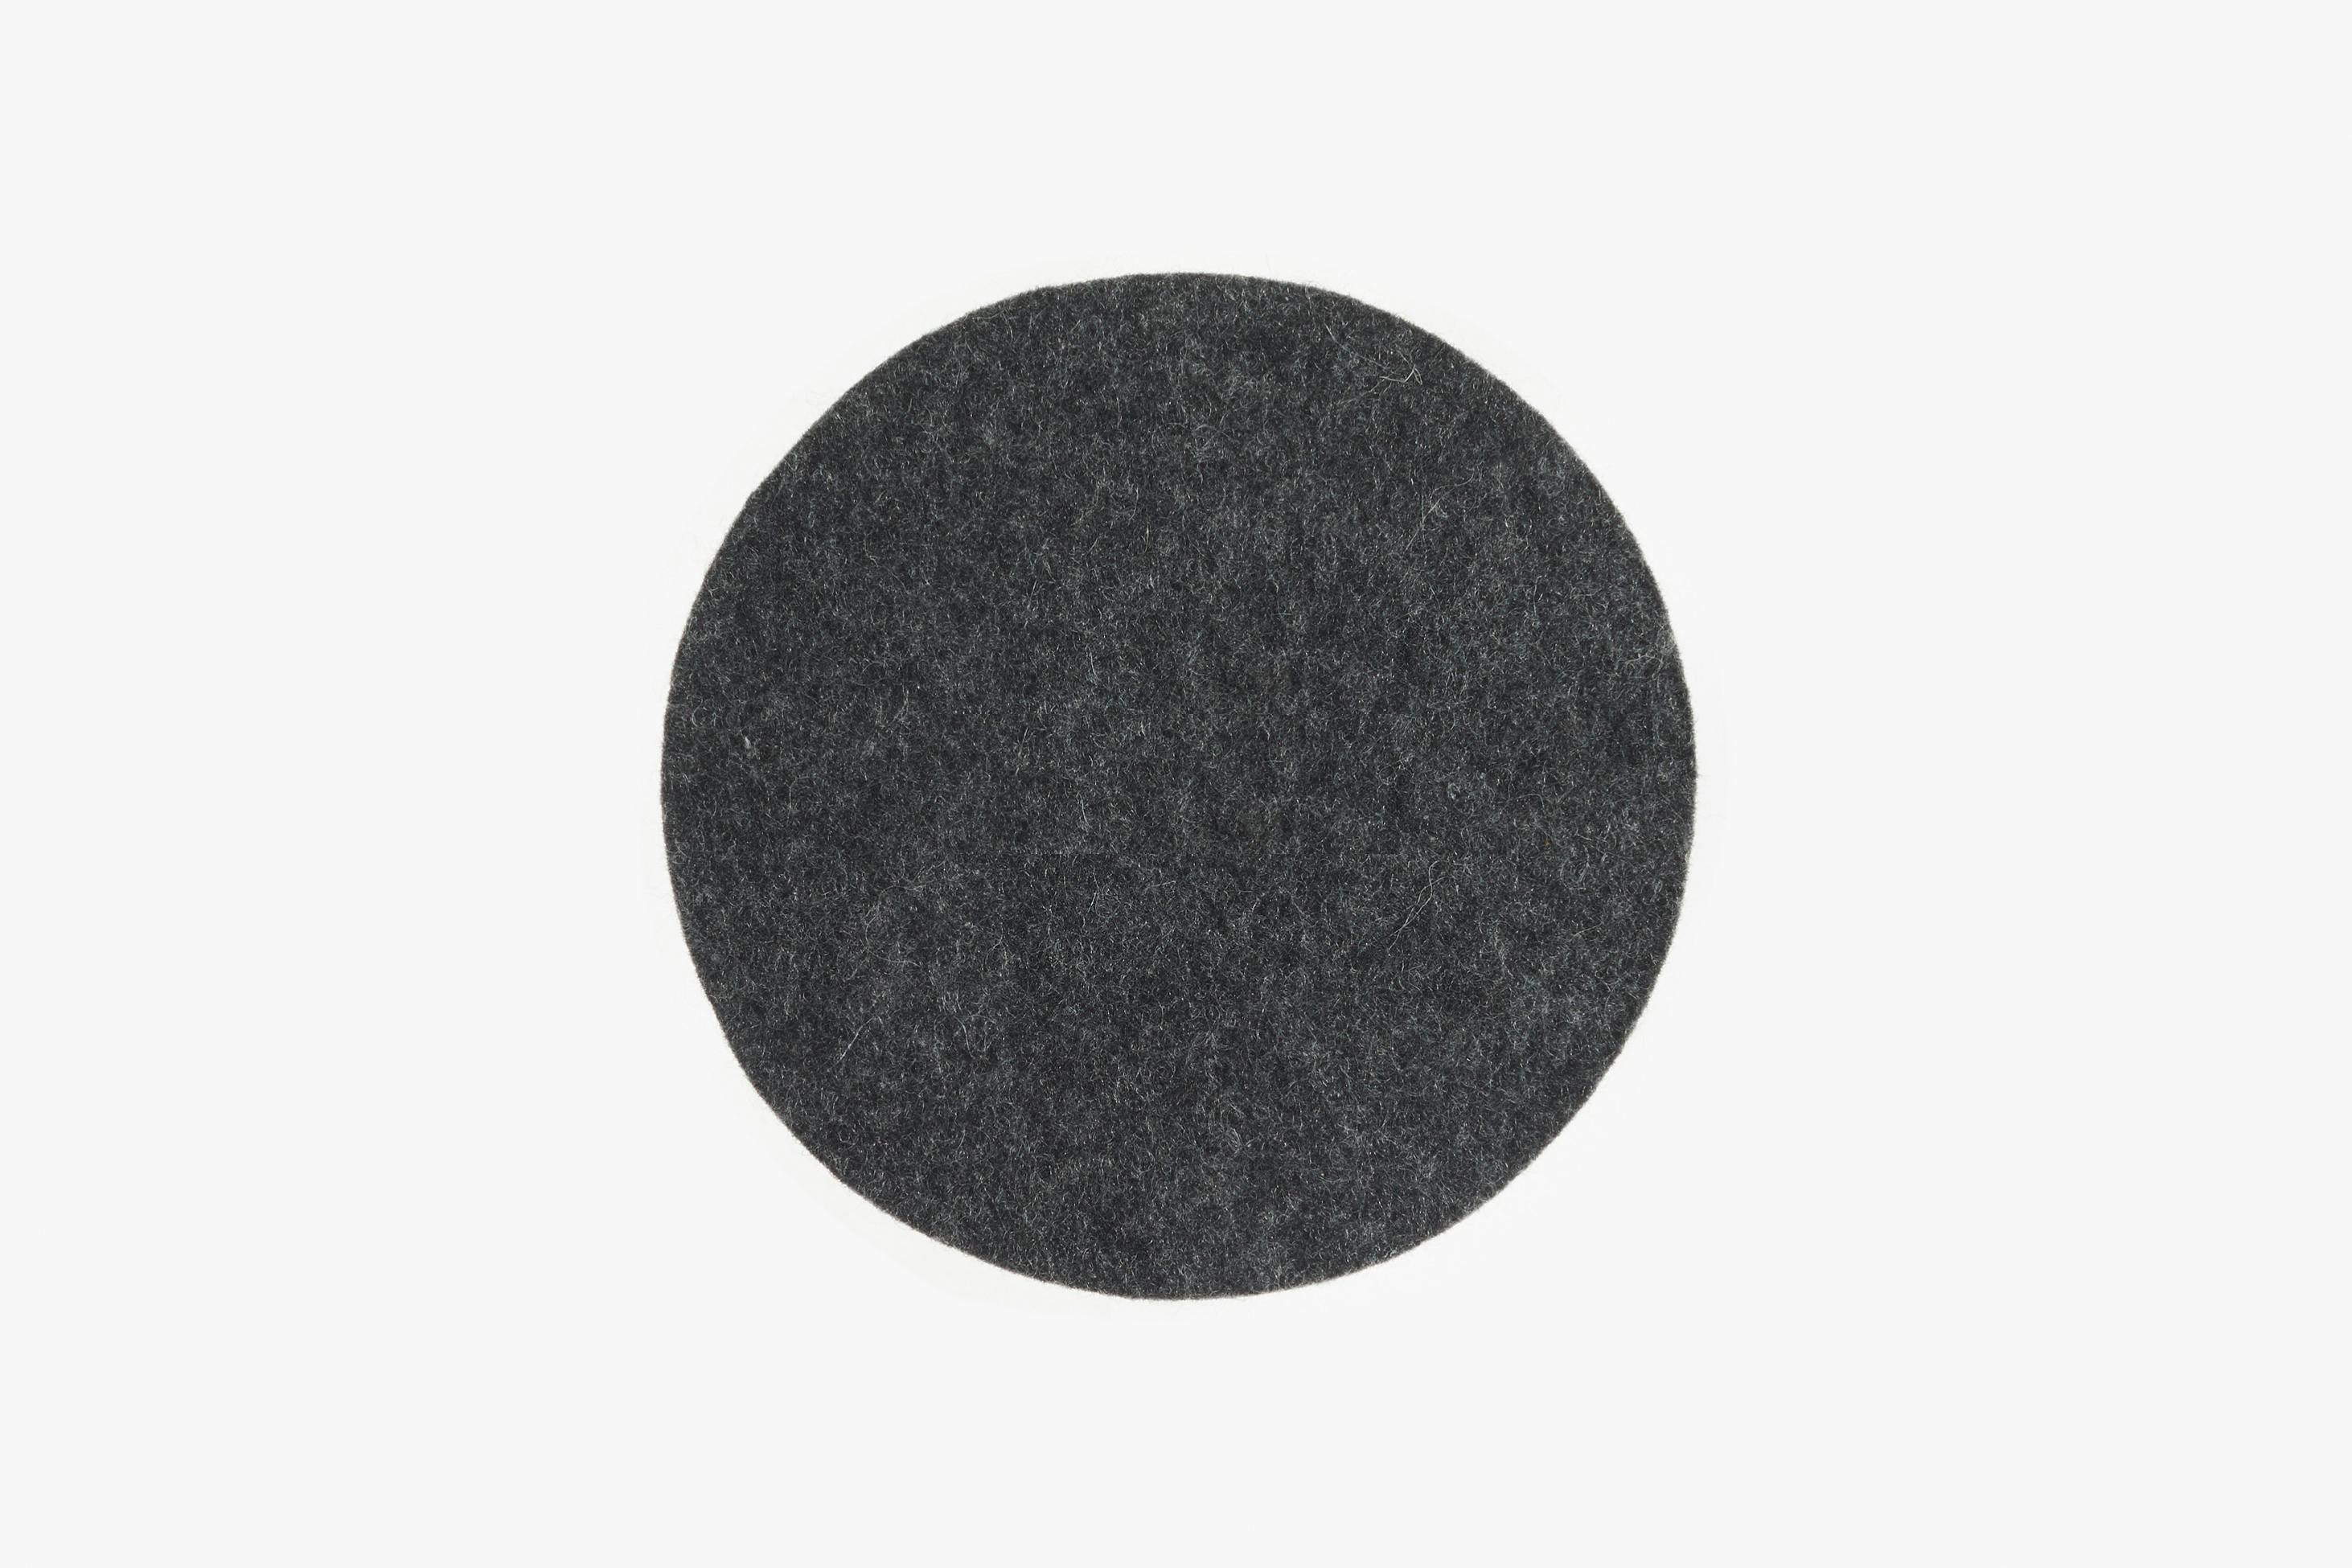 The Felt Coasters in Dusk Color on Display